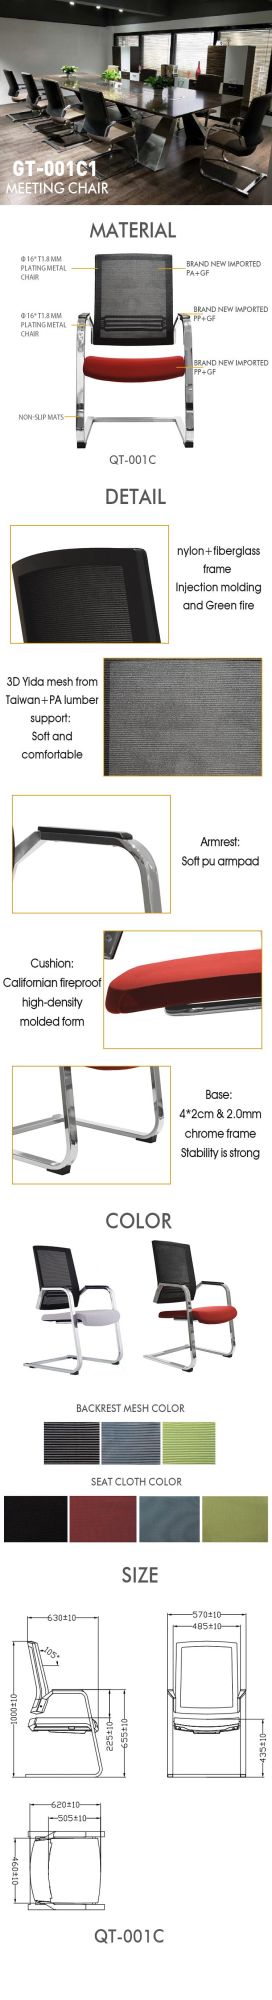 Metal Customized Huy Stand Export Packing 74*59*63 Home Office Chair